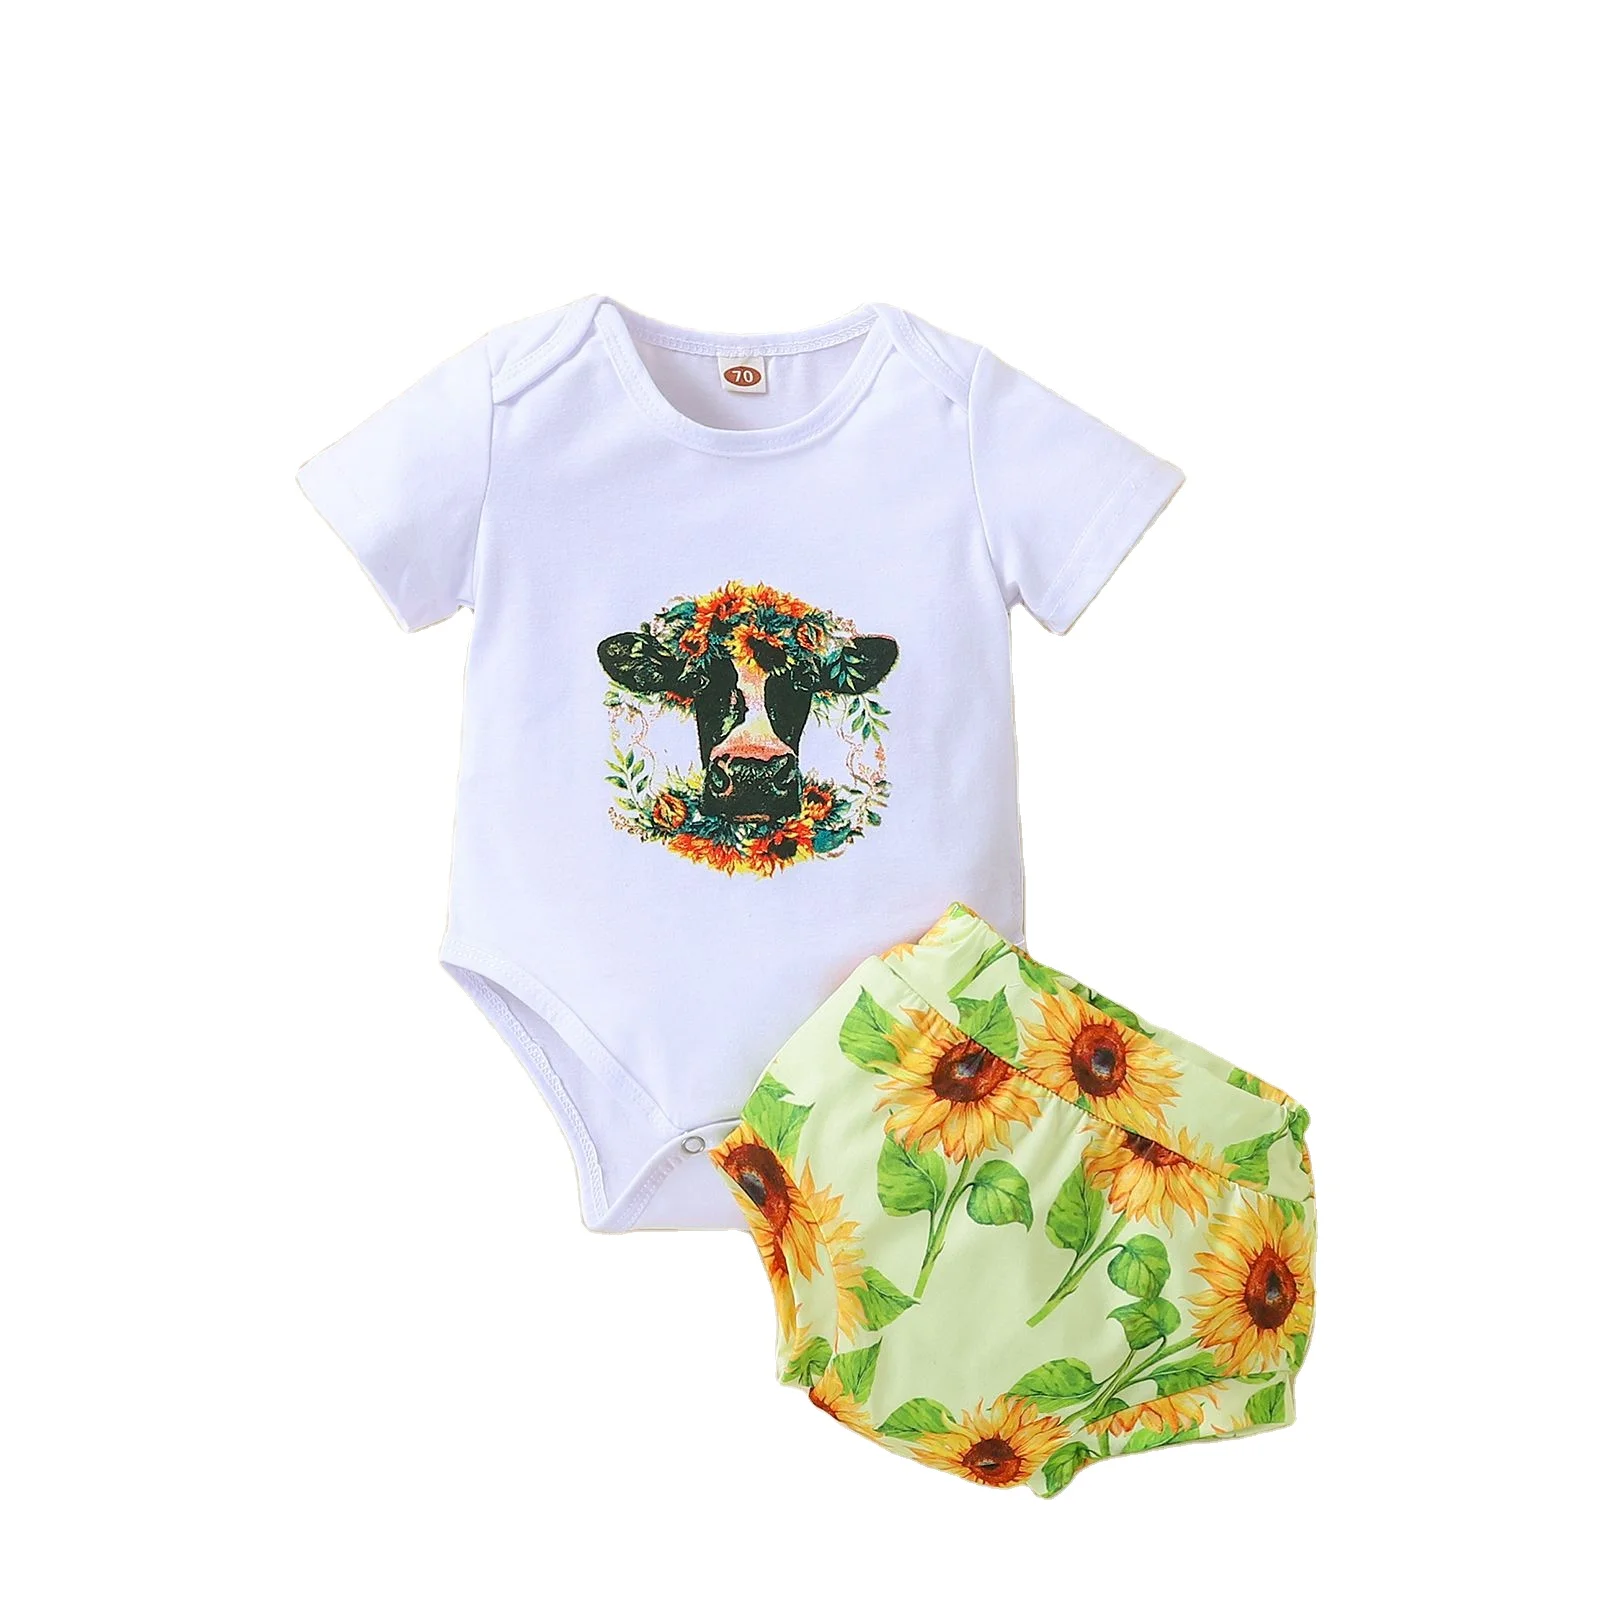 

wholesale Summer Infant Baby Girl Outfits Set cotton print romper+sunflower shorts Suit baby Girls Clothing set, As image shown